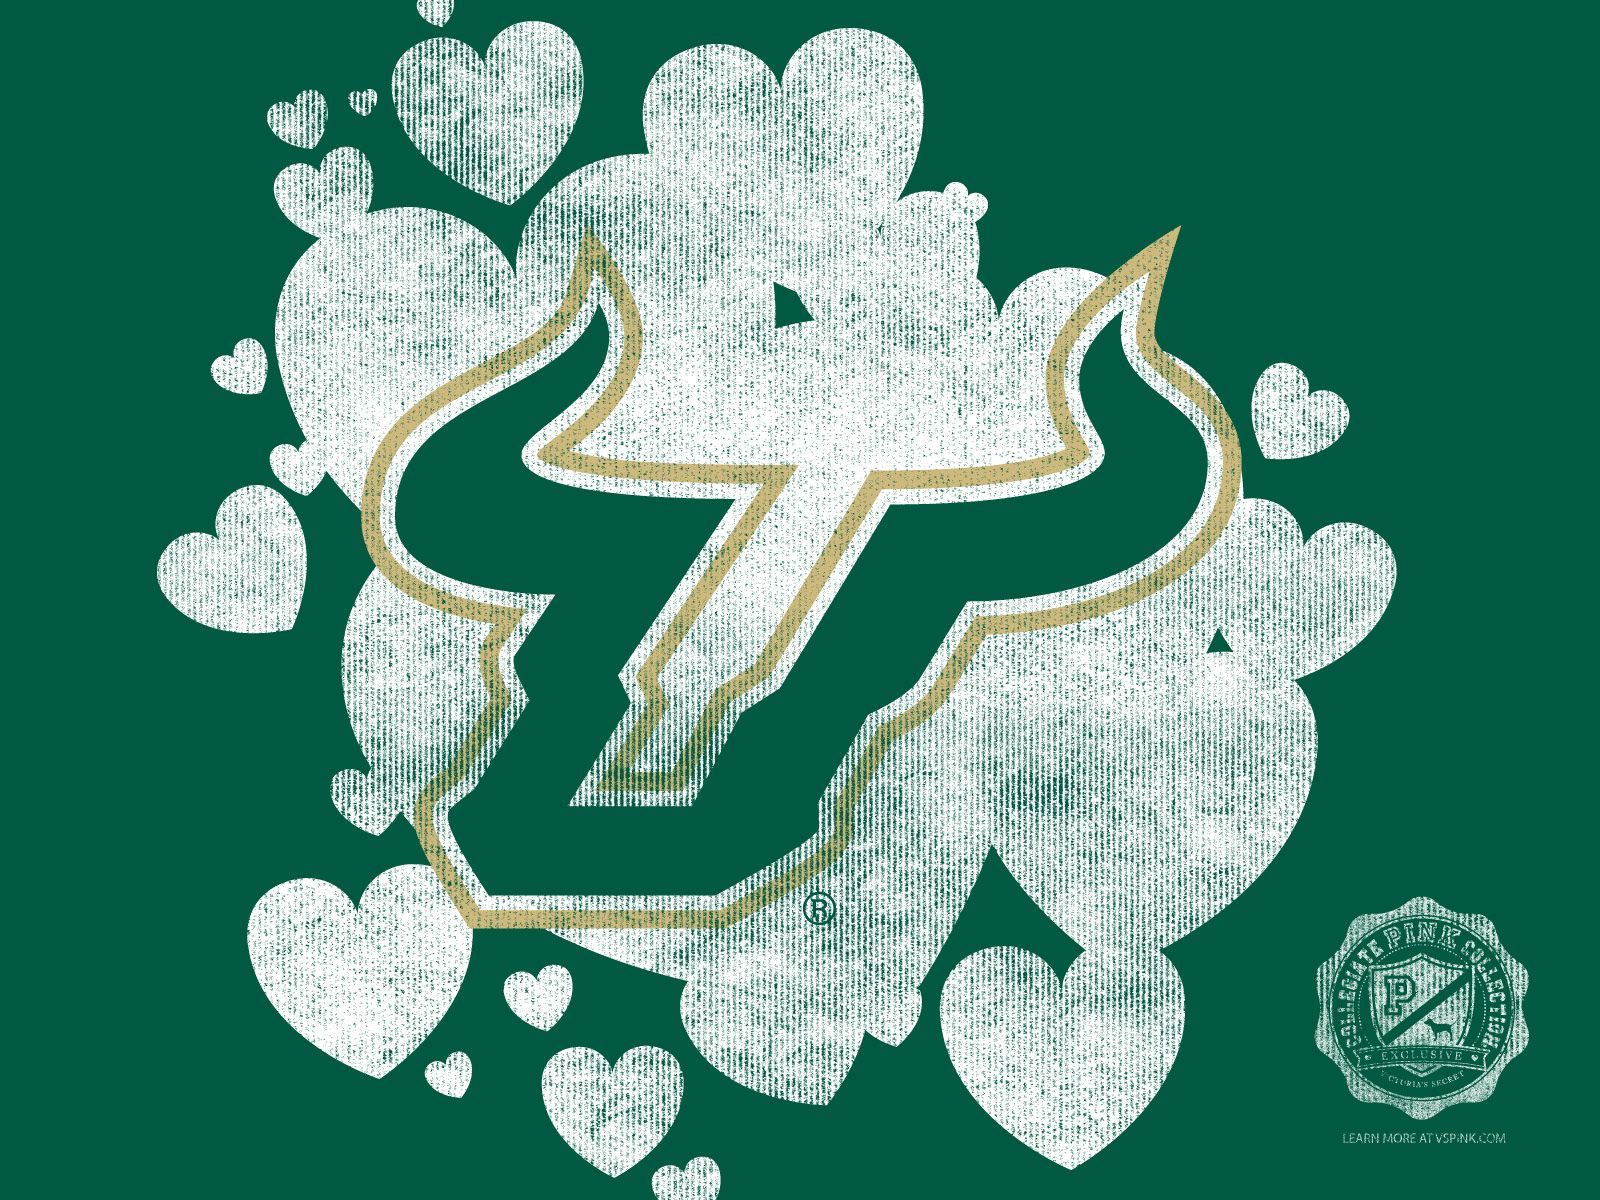 USF Wallpapers Wallpaper Cave